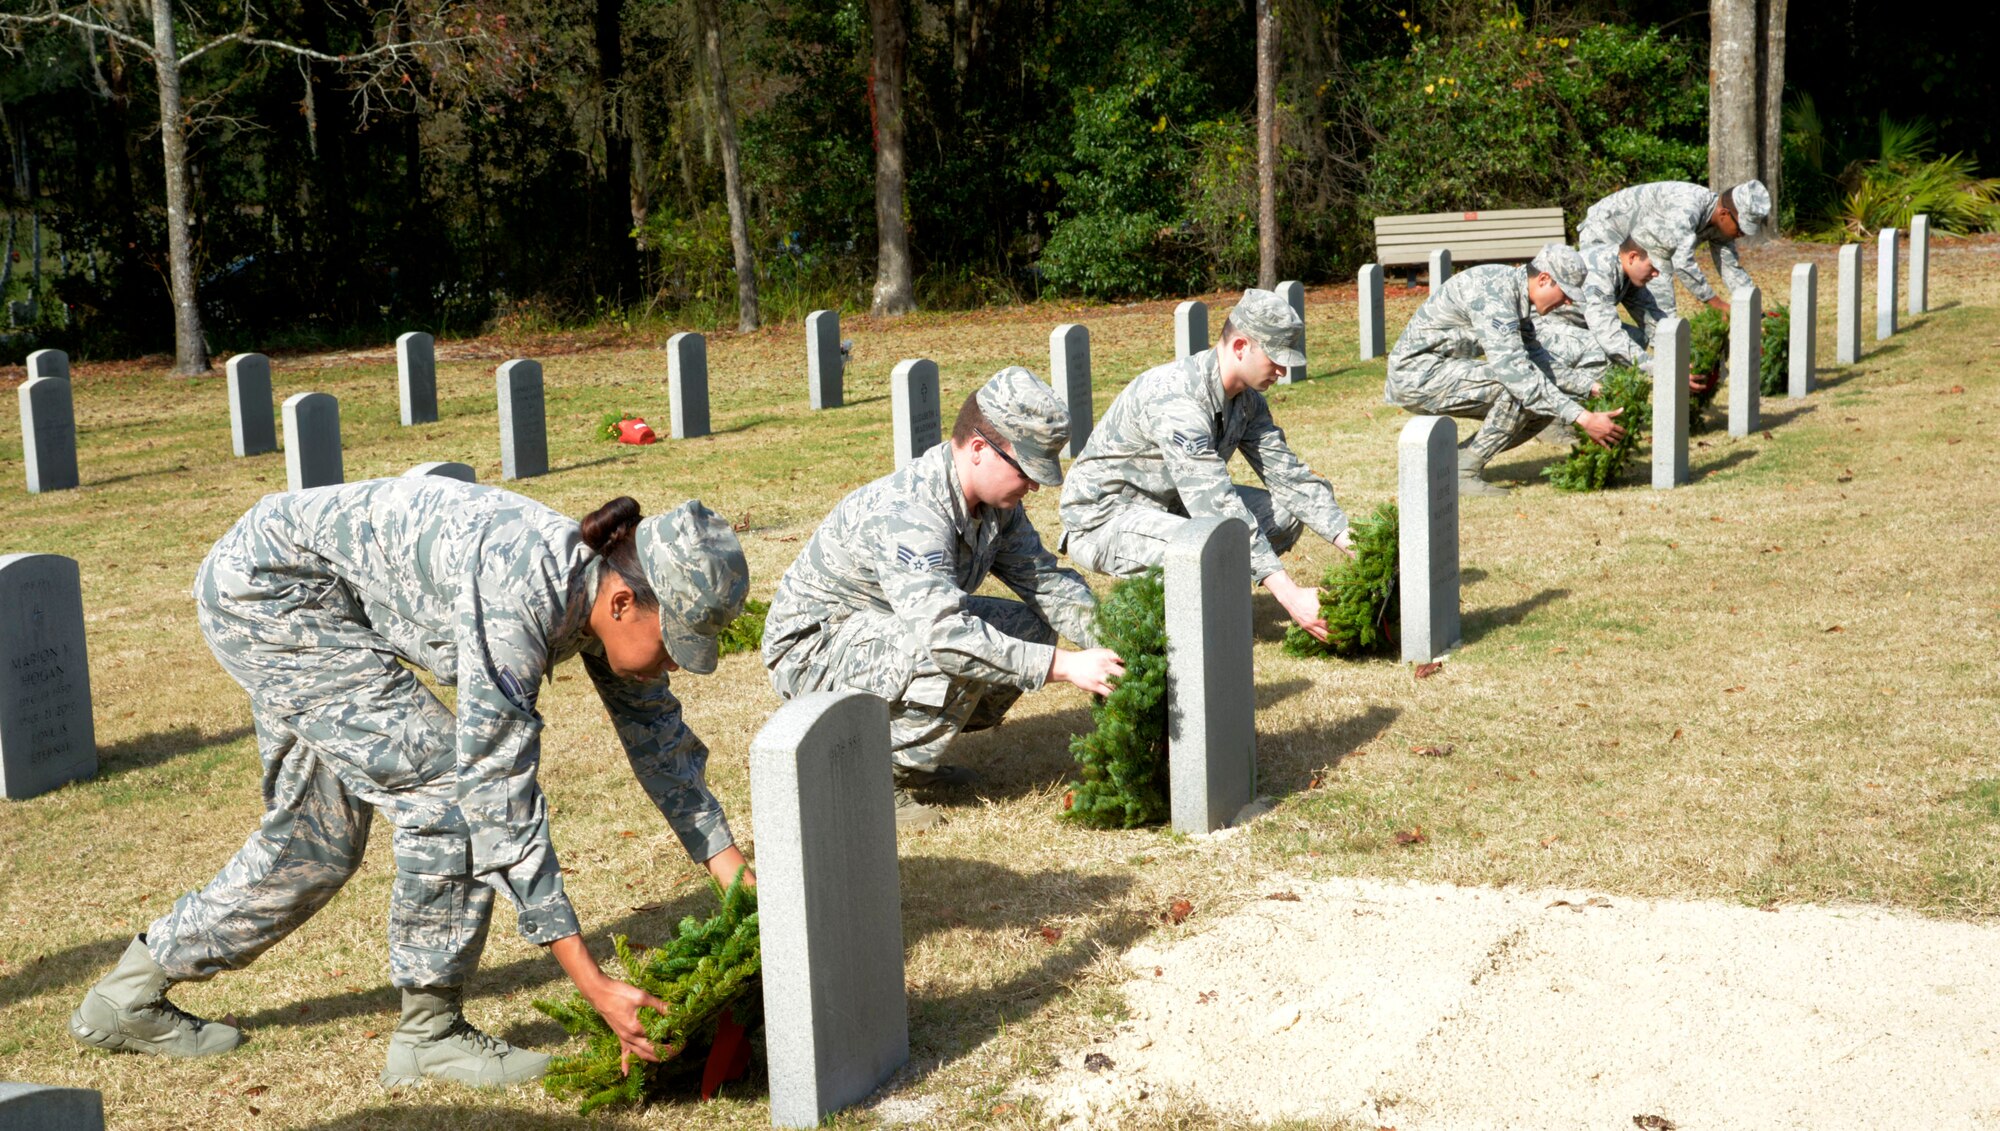 Airmen from MacDill Air Force Base,  lay wreaths on graves at the Florida National Cemetery in Bushnell, Fla., Dec. 17, 2016. Wreaths Across America is an organization that honors fallen service members by placing wreaths on gravesites during the holiday season. (U.S. Air Force photo by Senior Airman Tori Schultz)